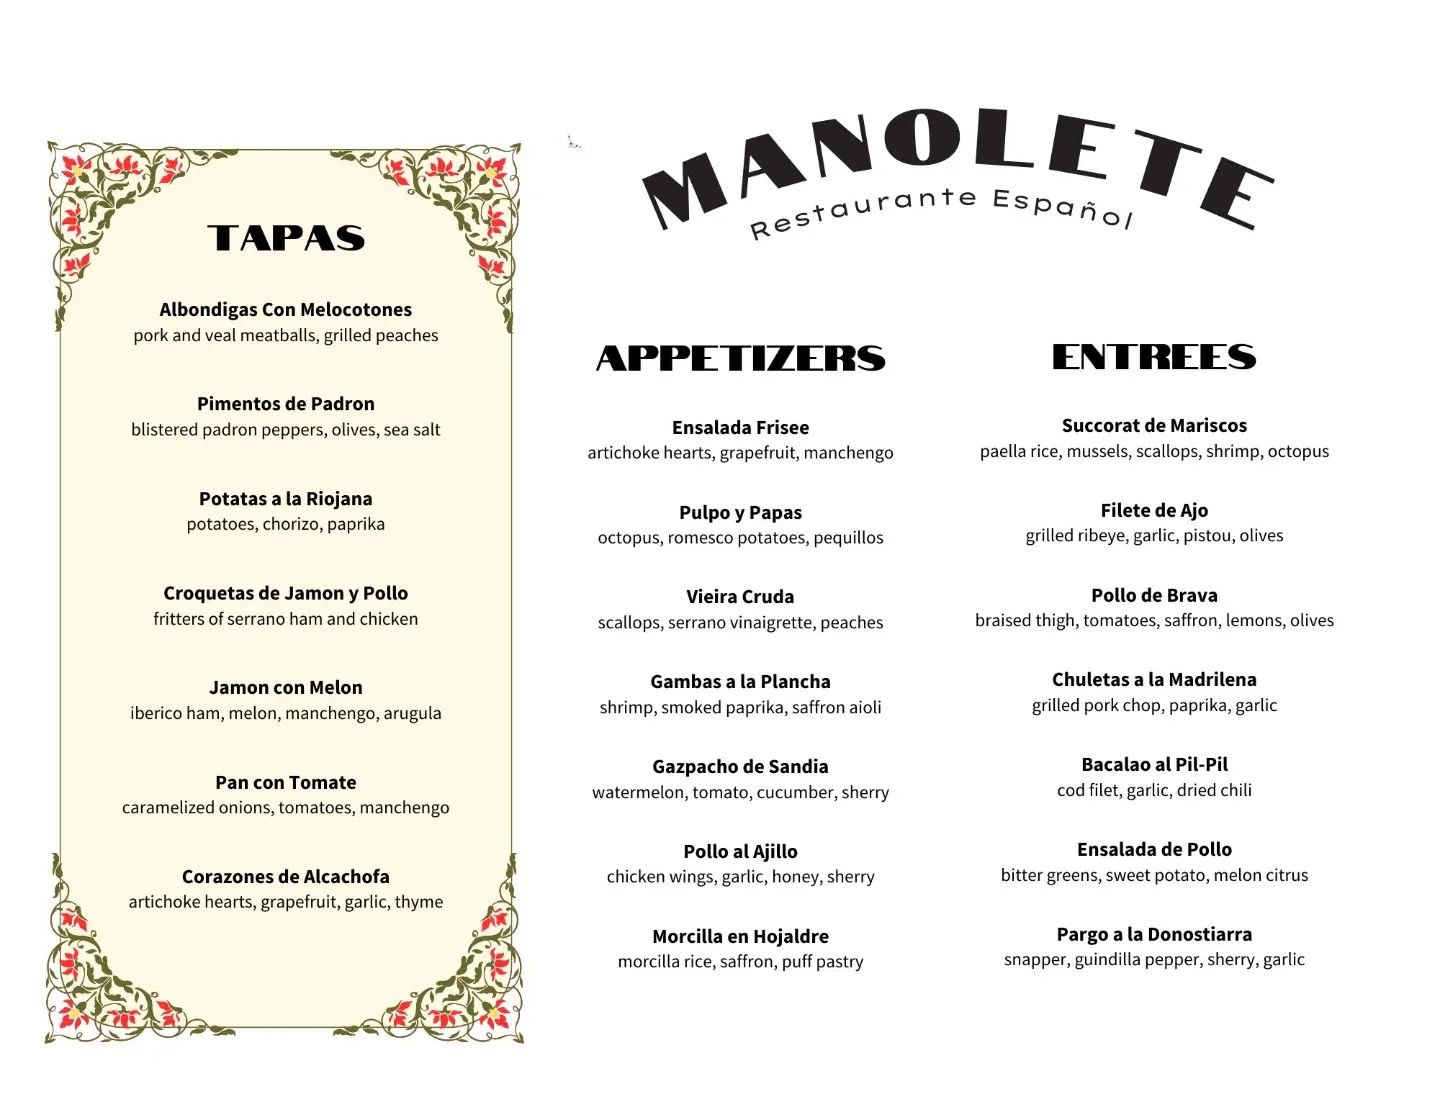 The menu is live! Manolete is opening Tuesday, June 4th and we cannot wait for you to try this delicious array of Spanish dishes. Learn more and snag your reservation at:⁠
⁠
www.nochi.org/manolete⁠
⁠
#intheNOCHI #wherenolaeats #neworleansrestaurants 